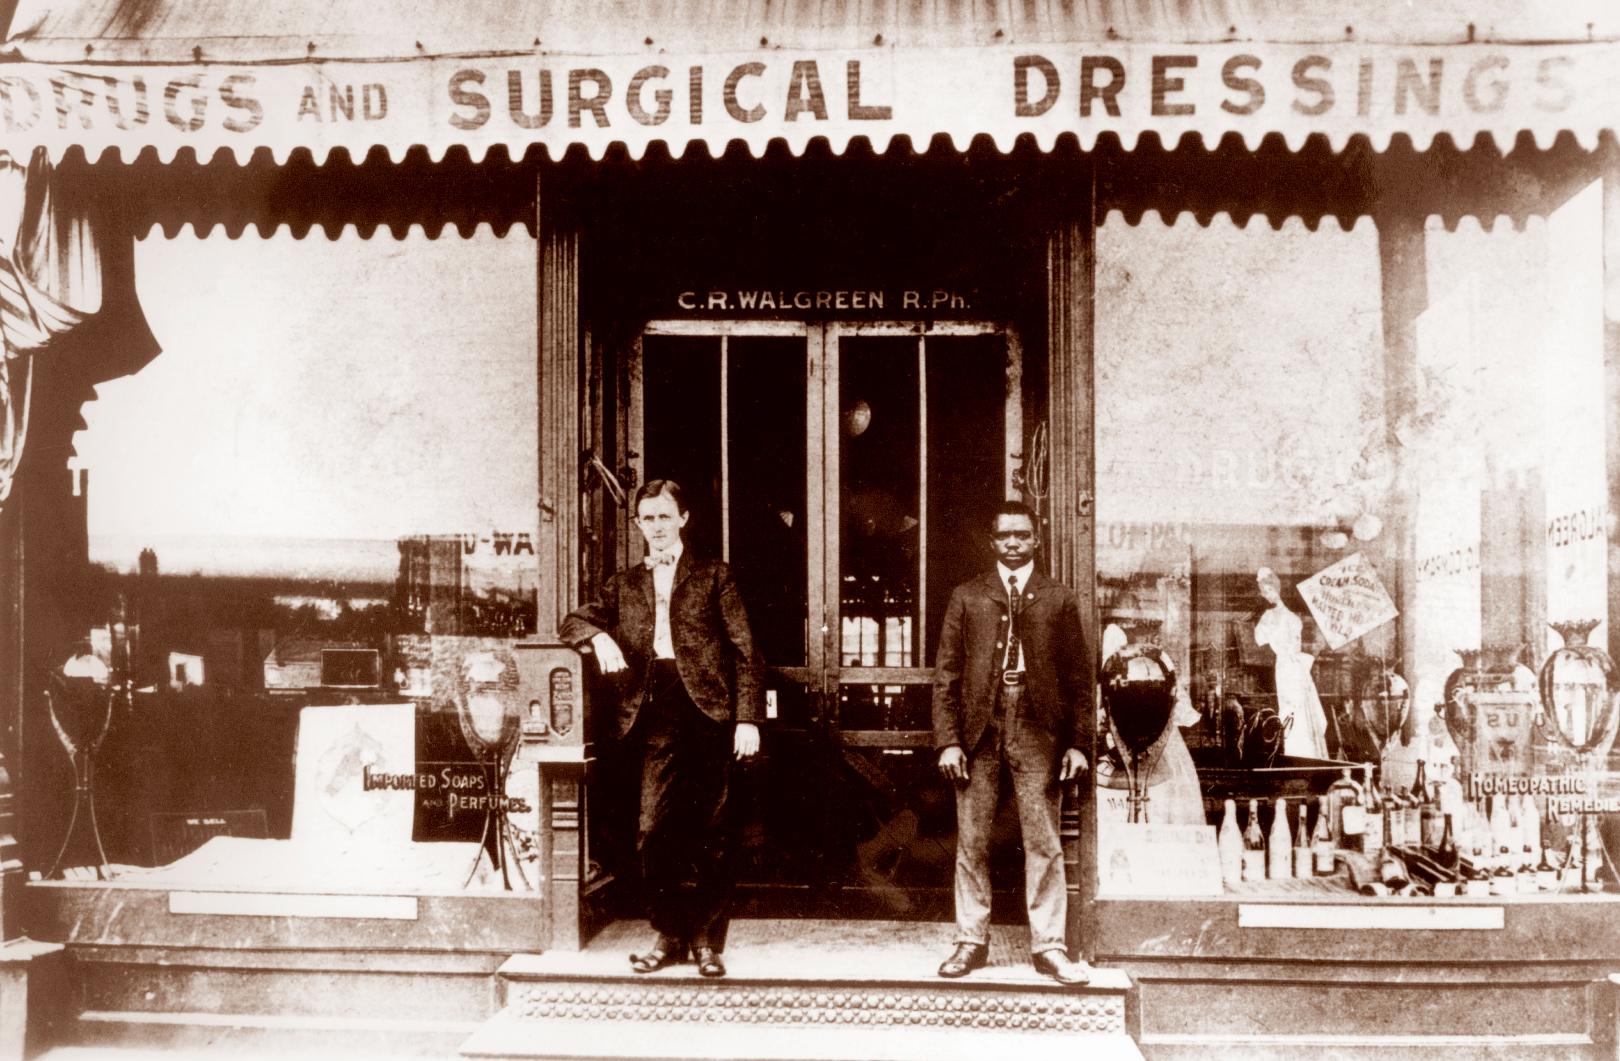 1901 - Charles R. Walgreen Sr. purchases the drugstore where he worked as a pharmacist in Chicago, U.S.